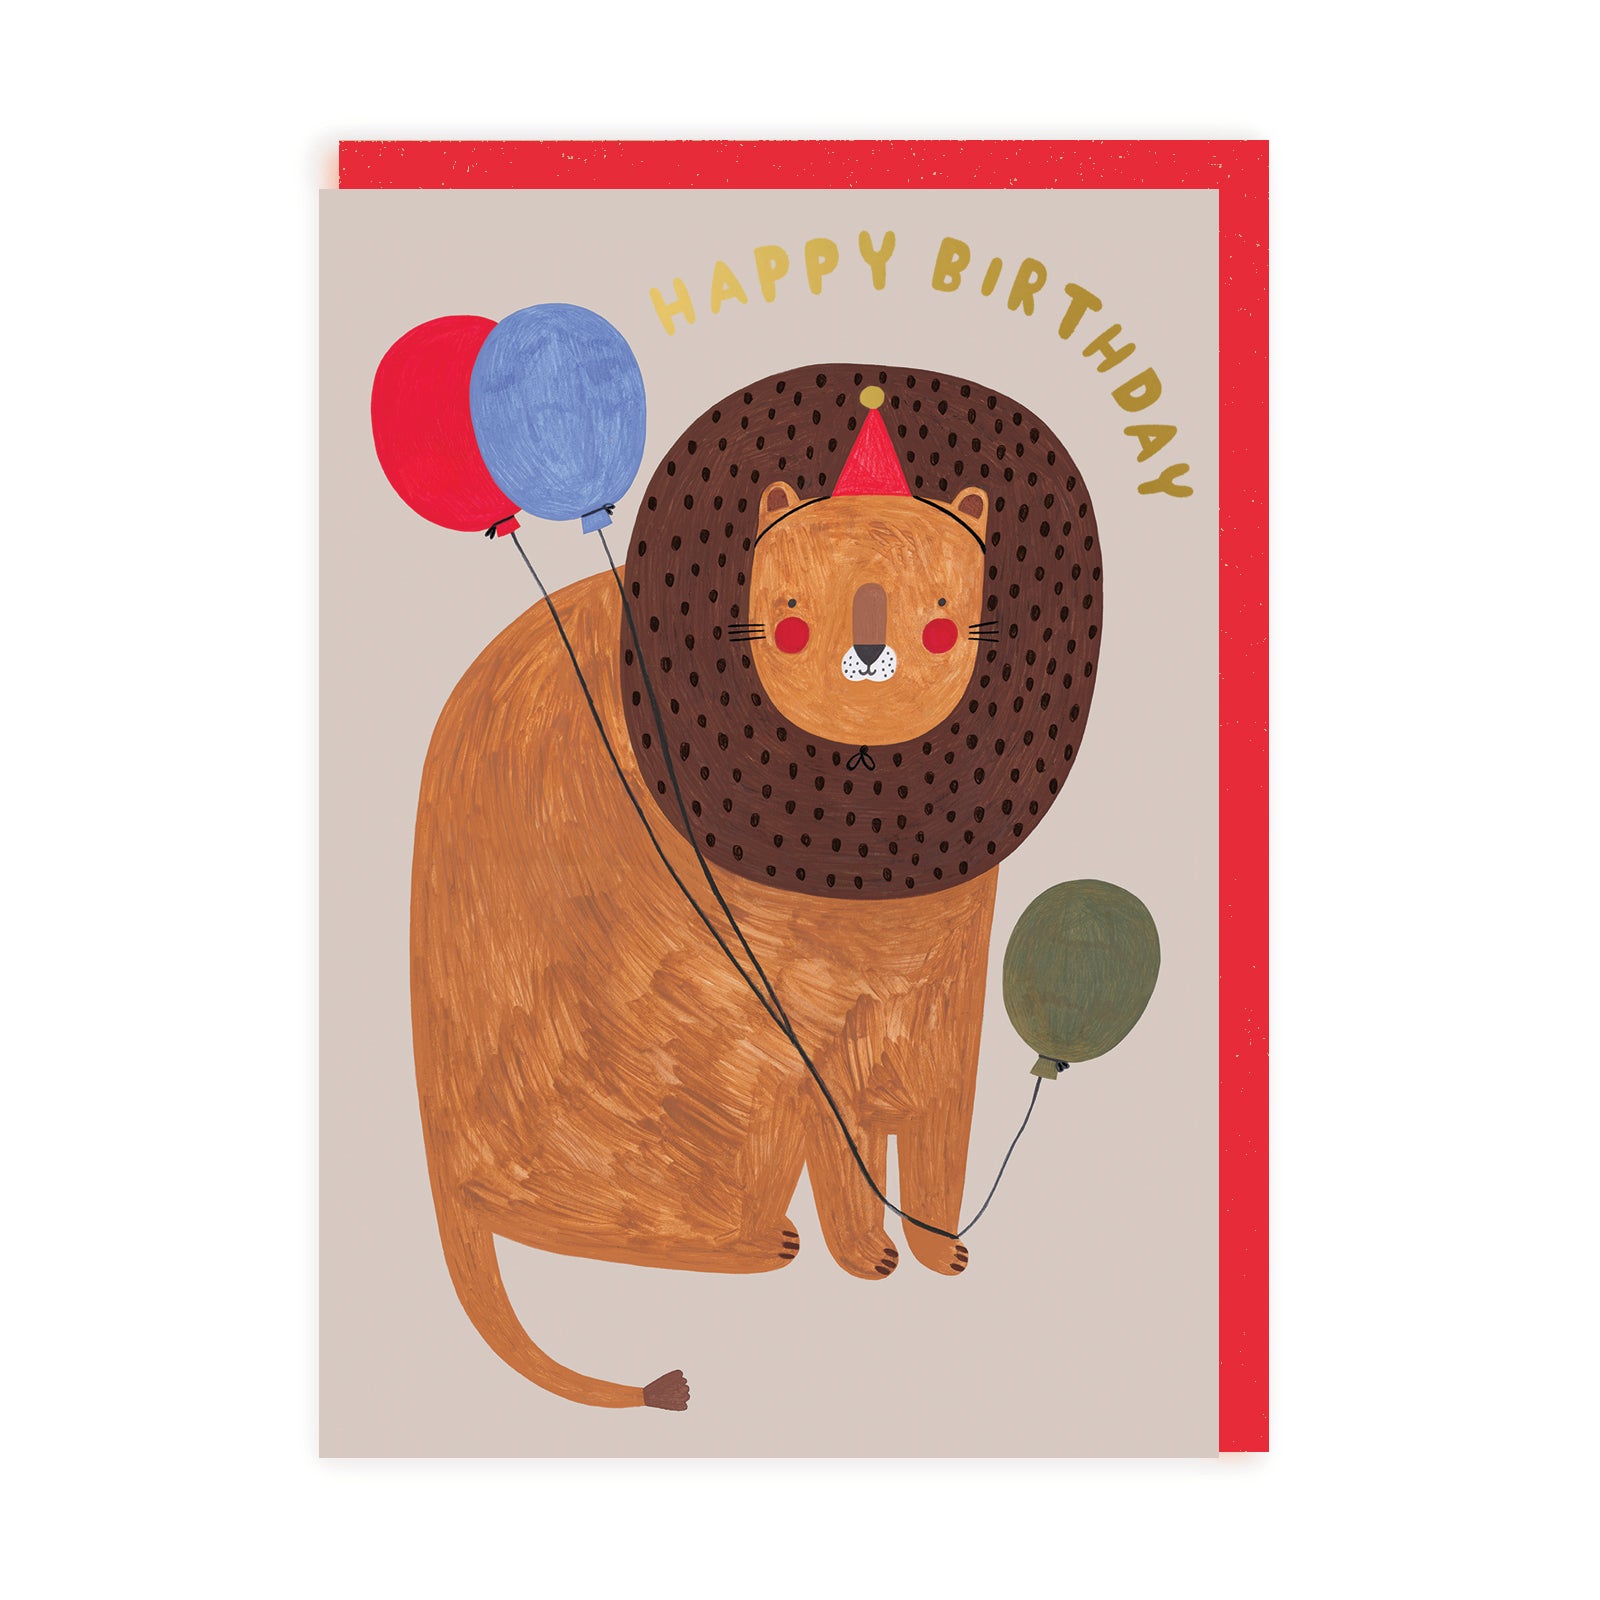 HBD Lions with Balloons Greeting Card